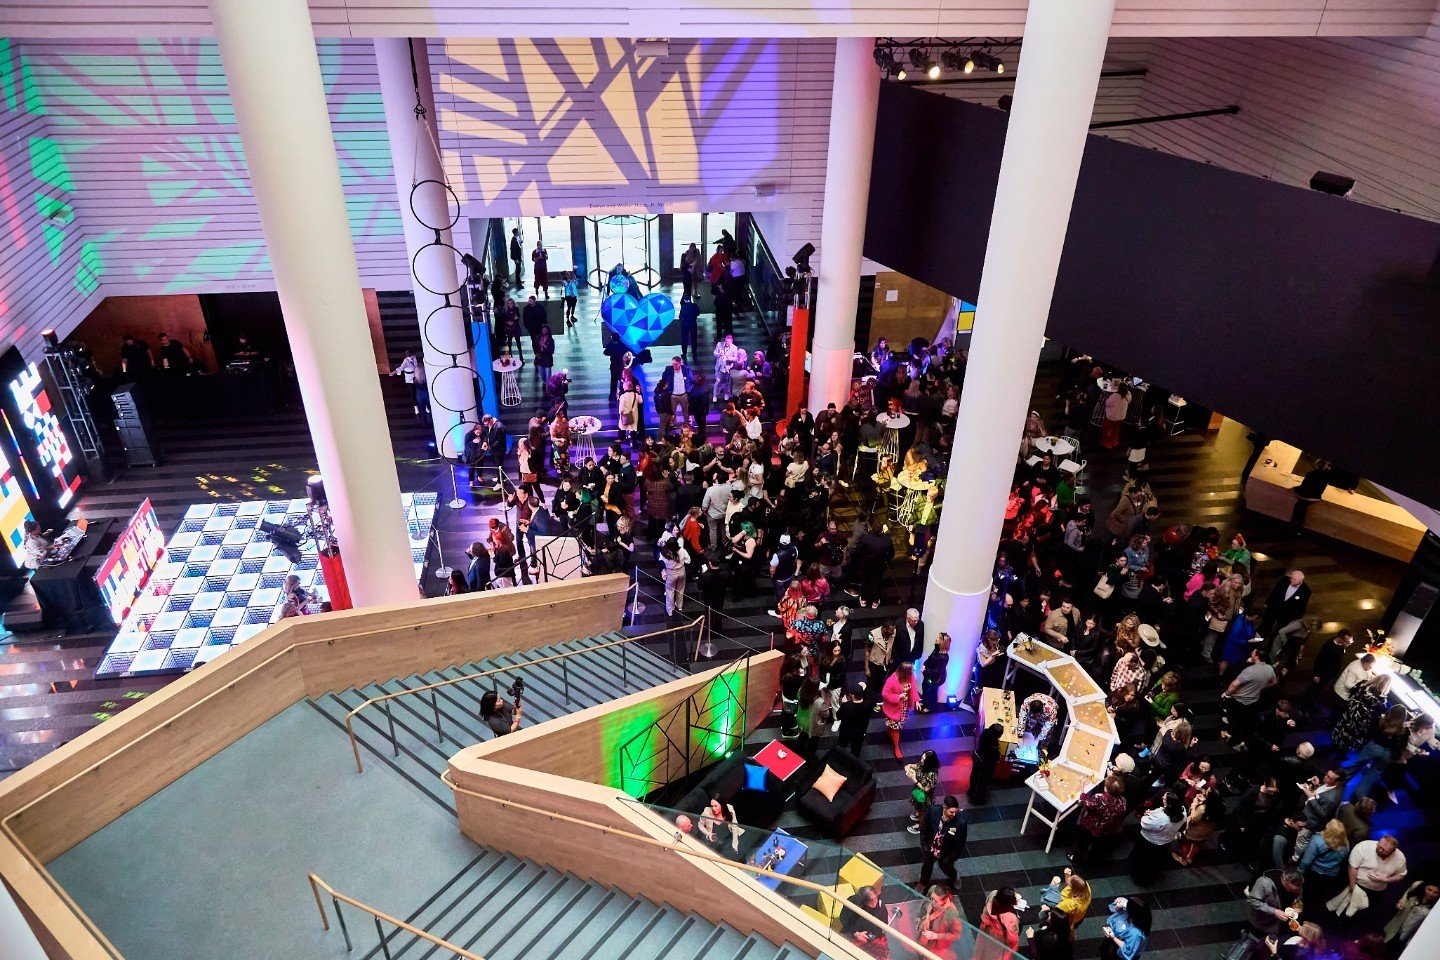 Throwing it back to the electrifying atmosphere of #EntireProductions #ModernArtAttack, where The Lux Productions (@theluxproductions) worked their magic and illuminated SF MOMA! 💡✨ 

We're thrilled to have partnered with them, as they brought innov